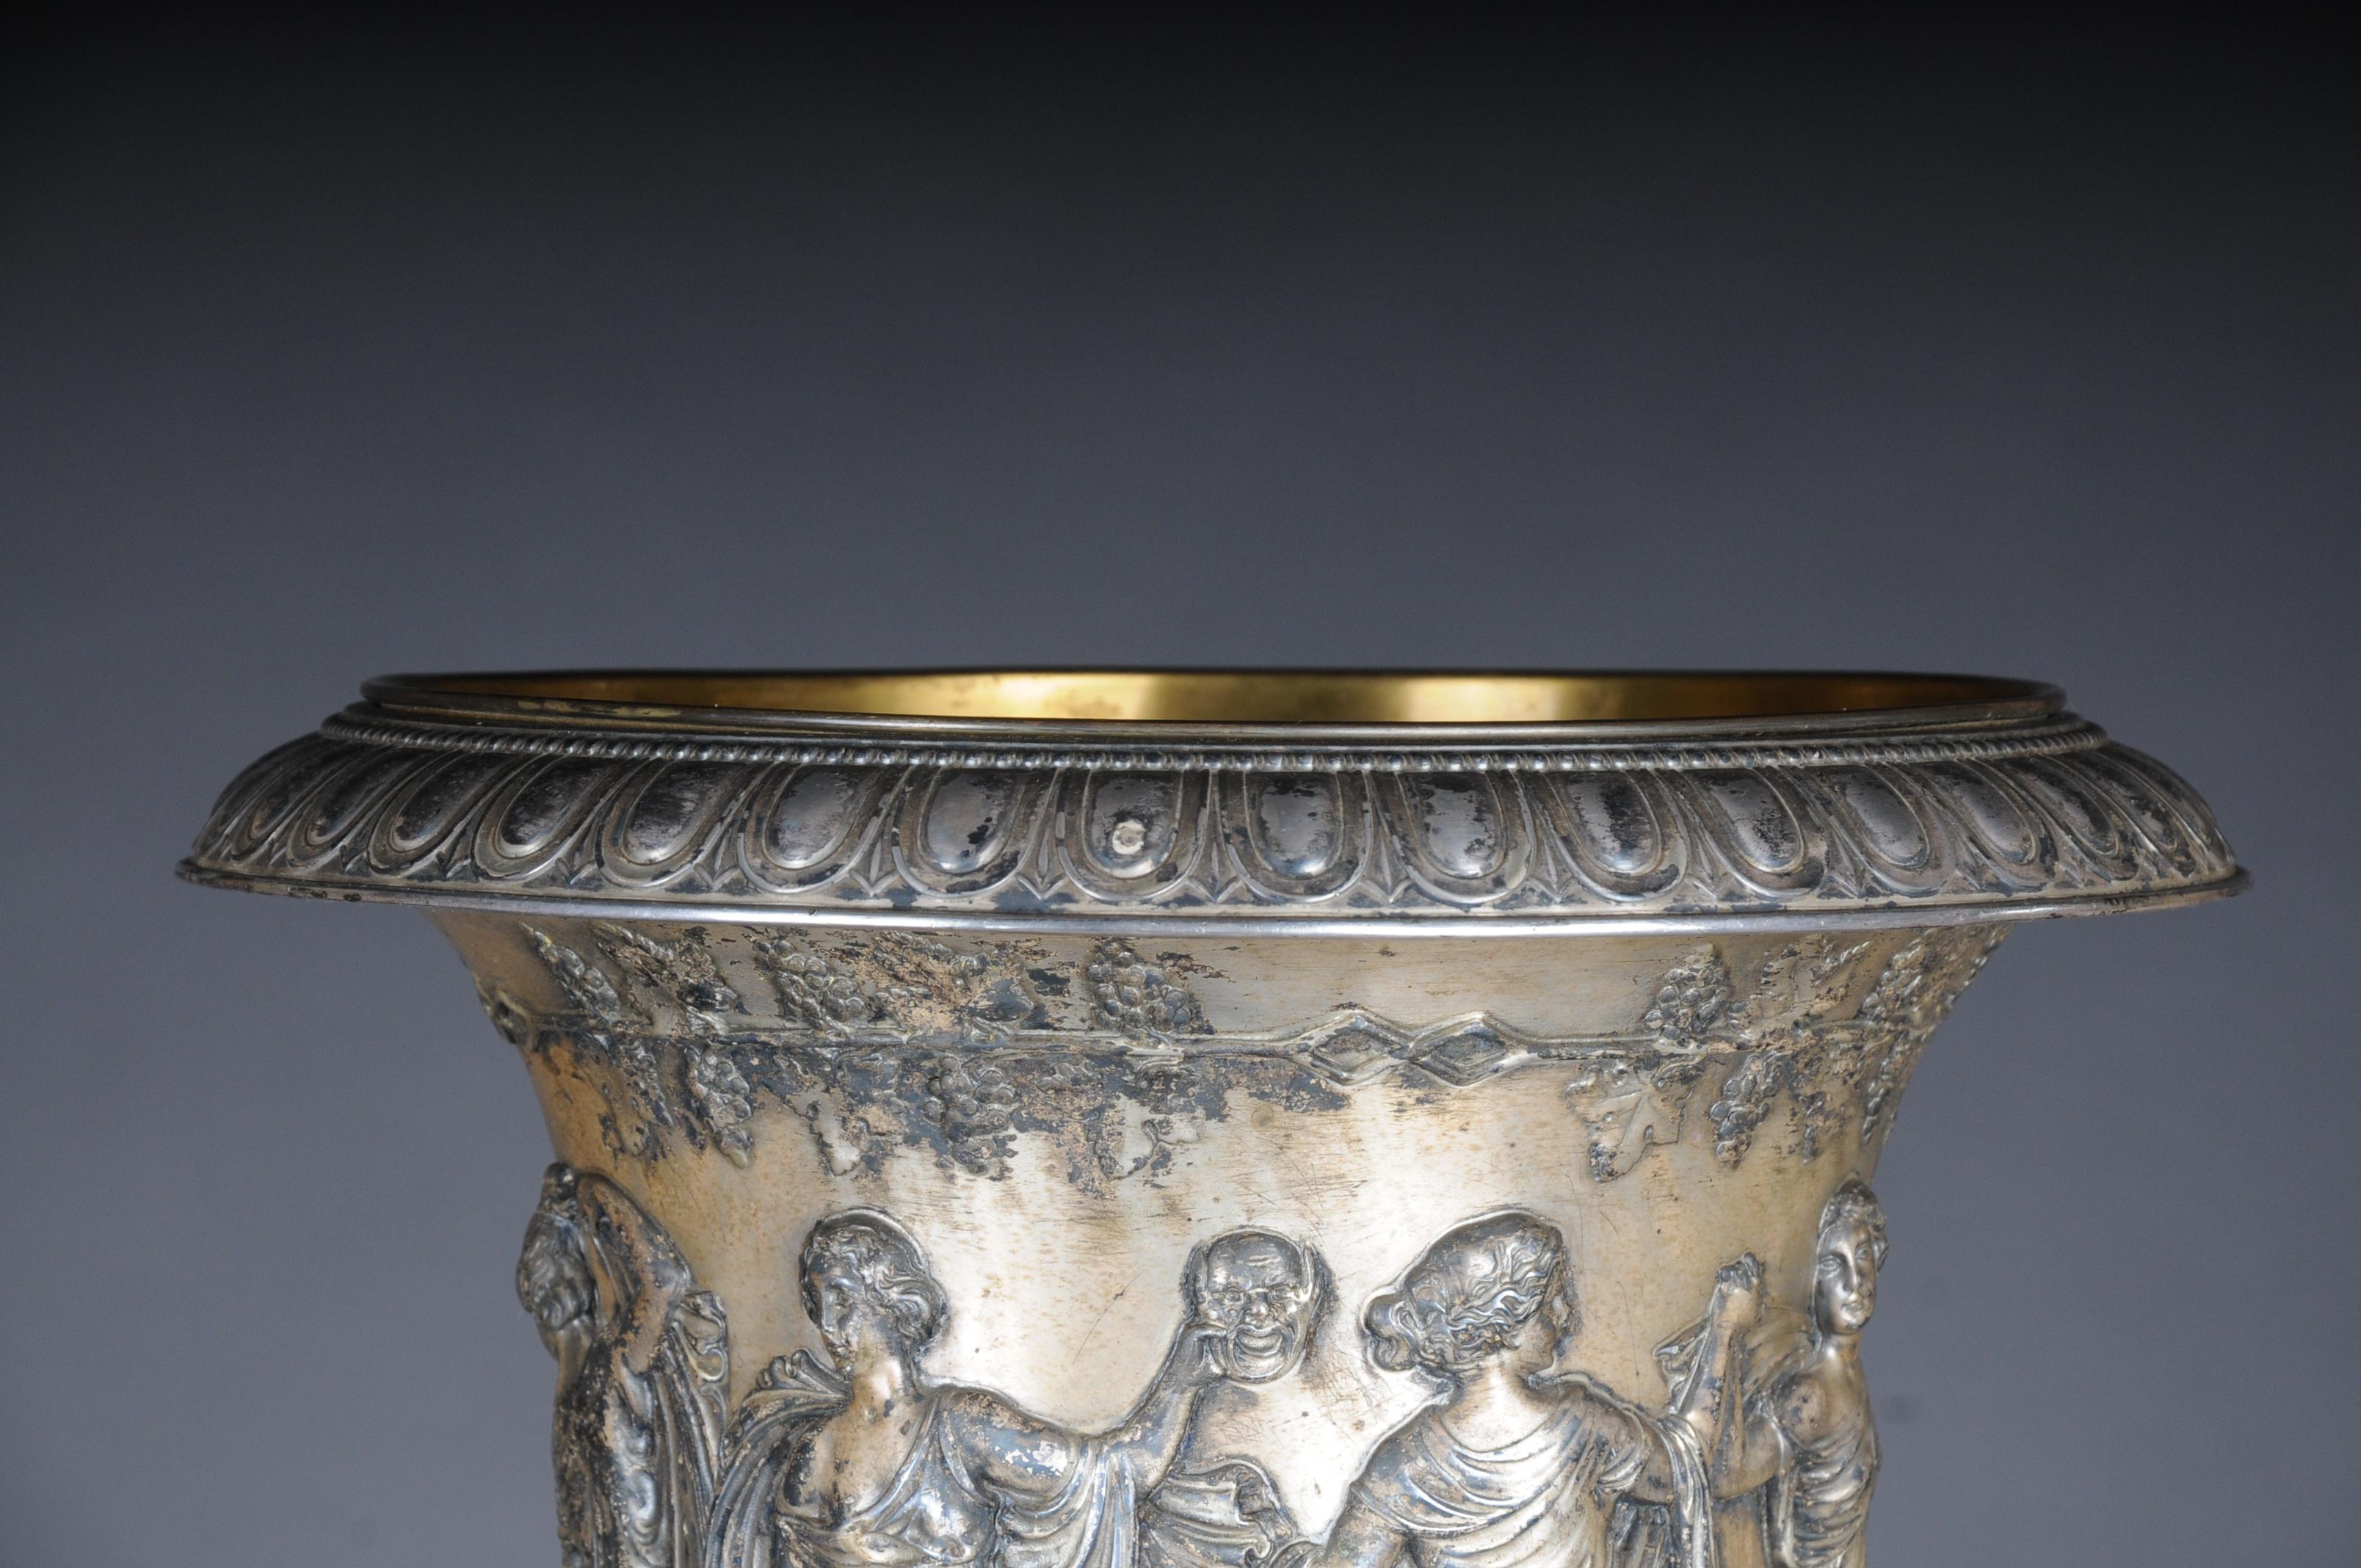 Unique Classicist amphoras / crater vase WMF silver, circa 1900
Extremely high quality processed amphora or crater vase. Probably WMF circa 1900.
Finely chased cast, silvered and gilded from inside.
Panoramic Greek / Roman scenery as a relief